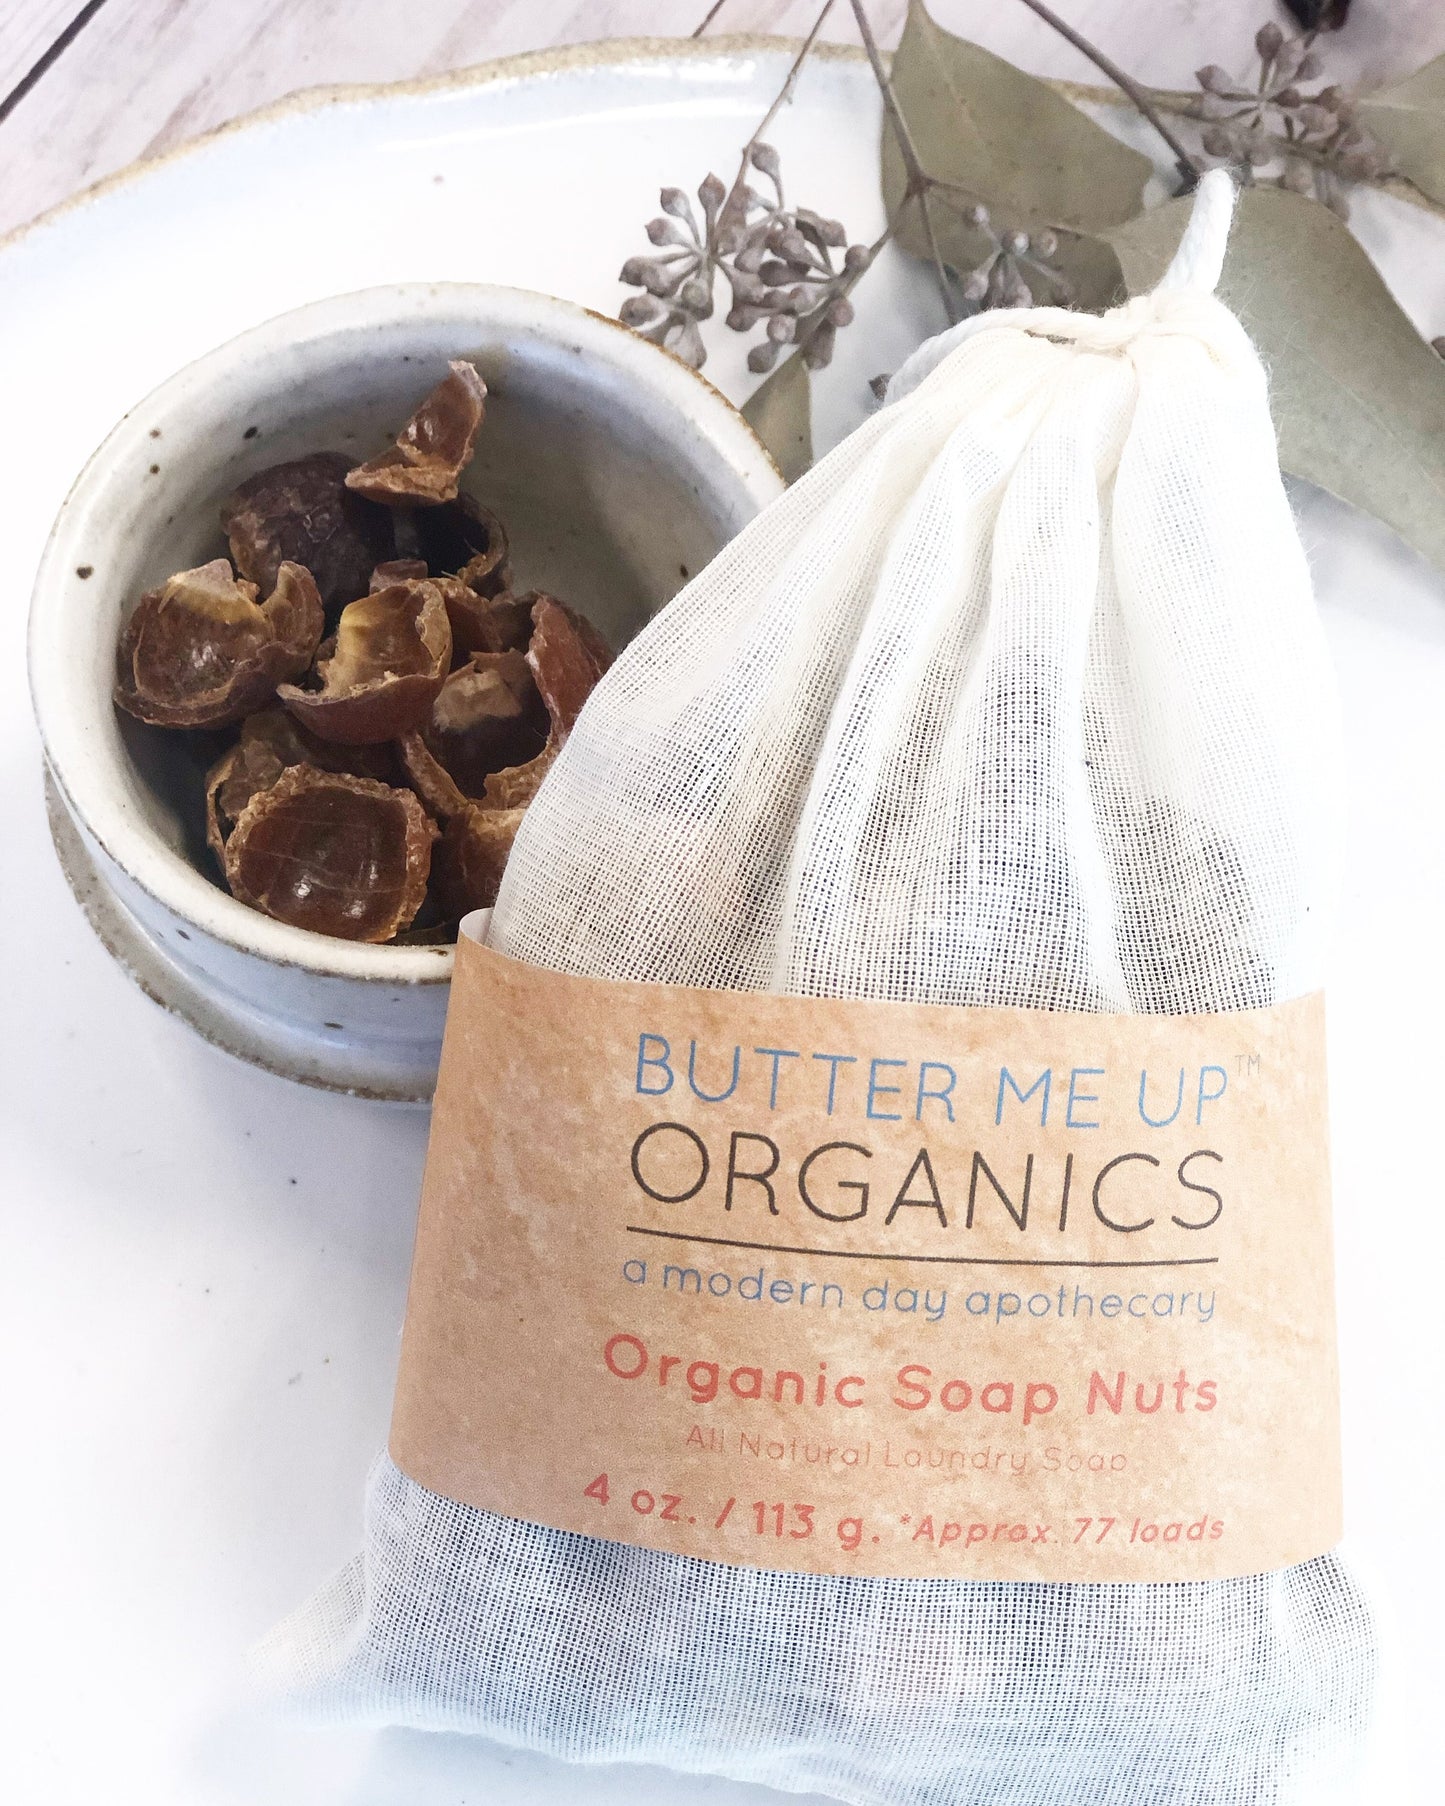 Organic Soap Nuts / All Natural Laundry Soap / Eco friendly